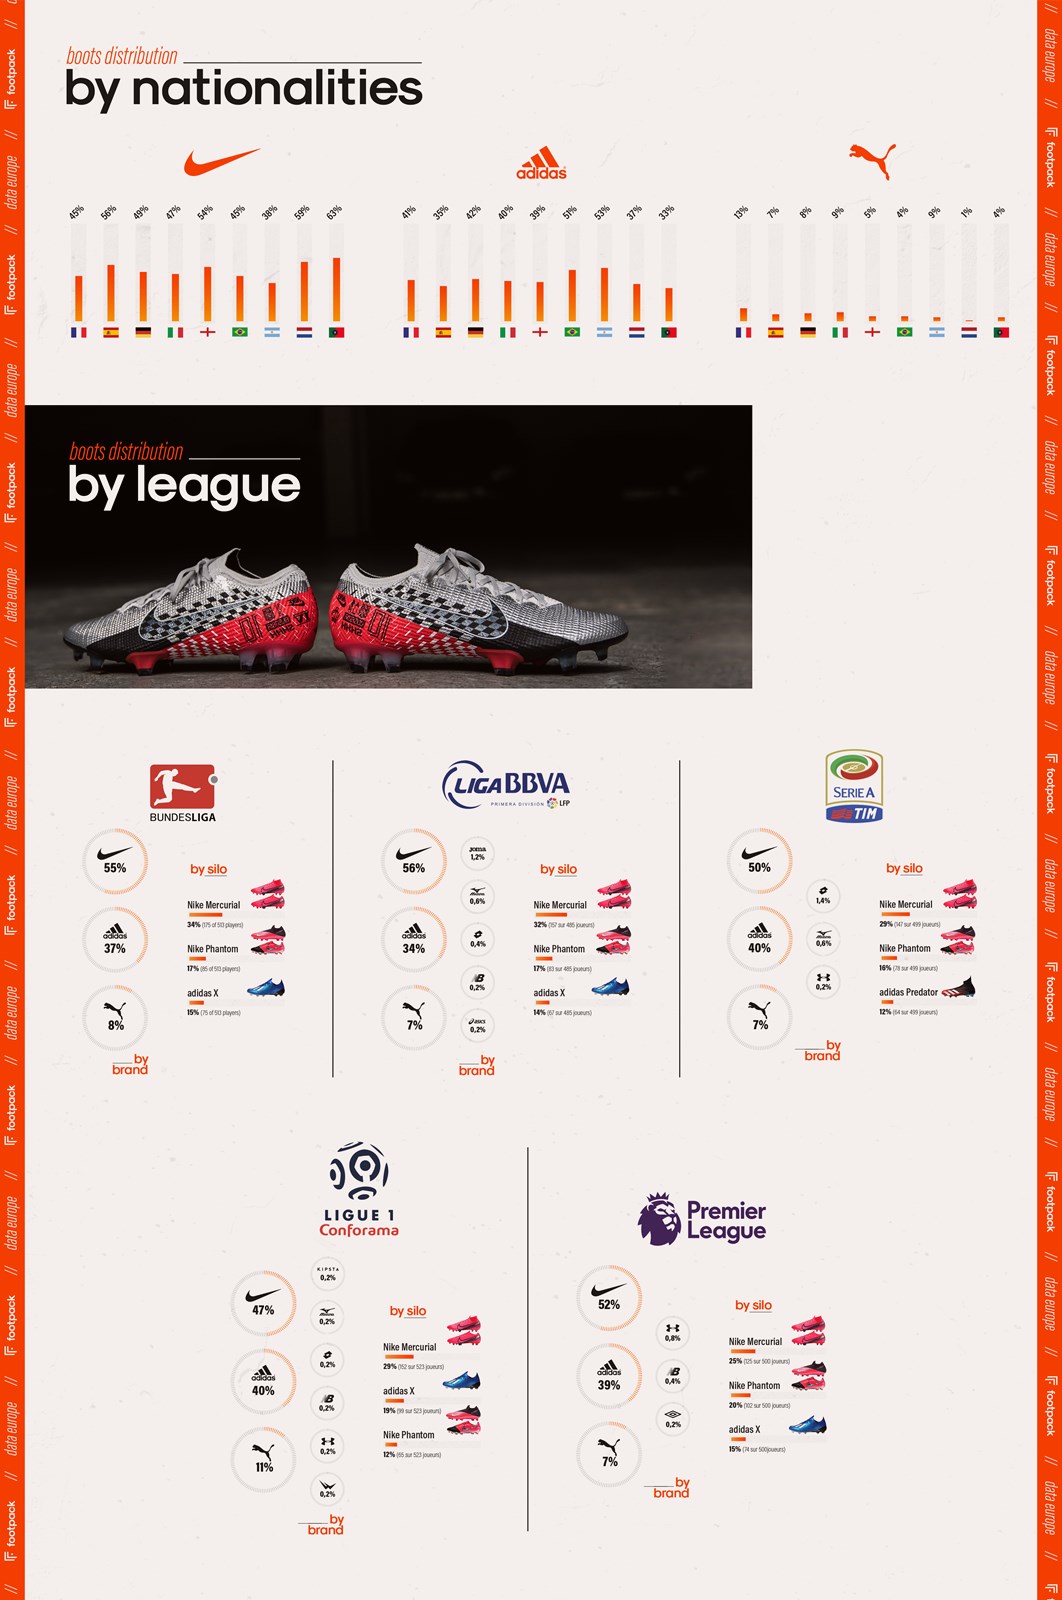 Adidas/Nike football boots made by other companies : r/midjourney